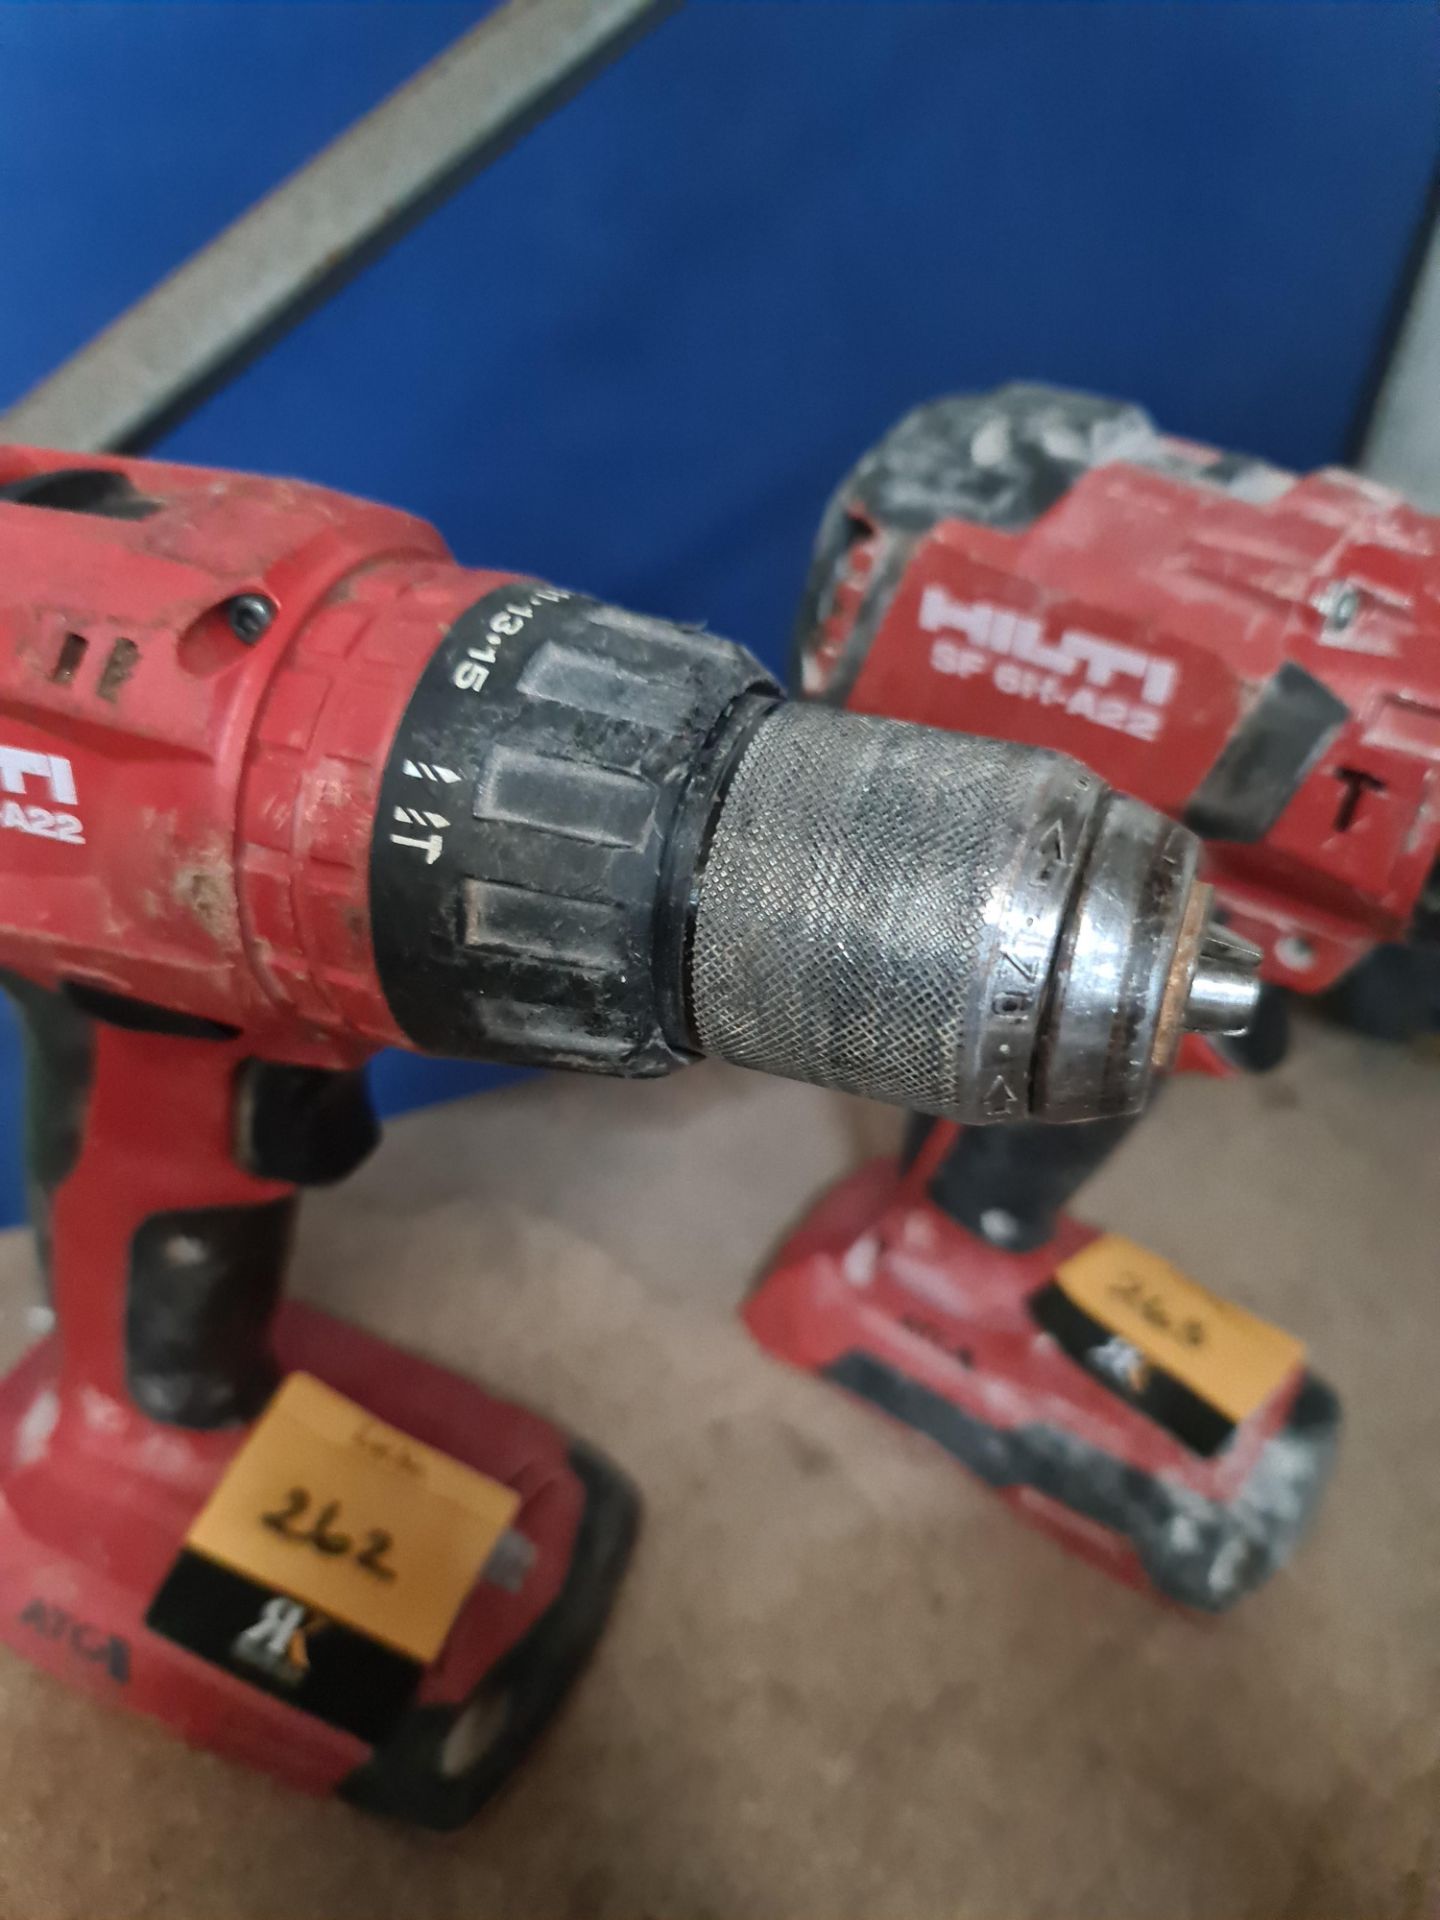 Hilti SF 6H-A22 cordless hammer drill driver - no battery - Image 4 of 5